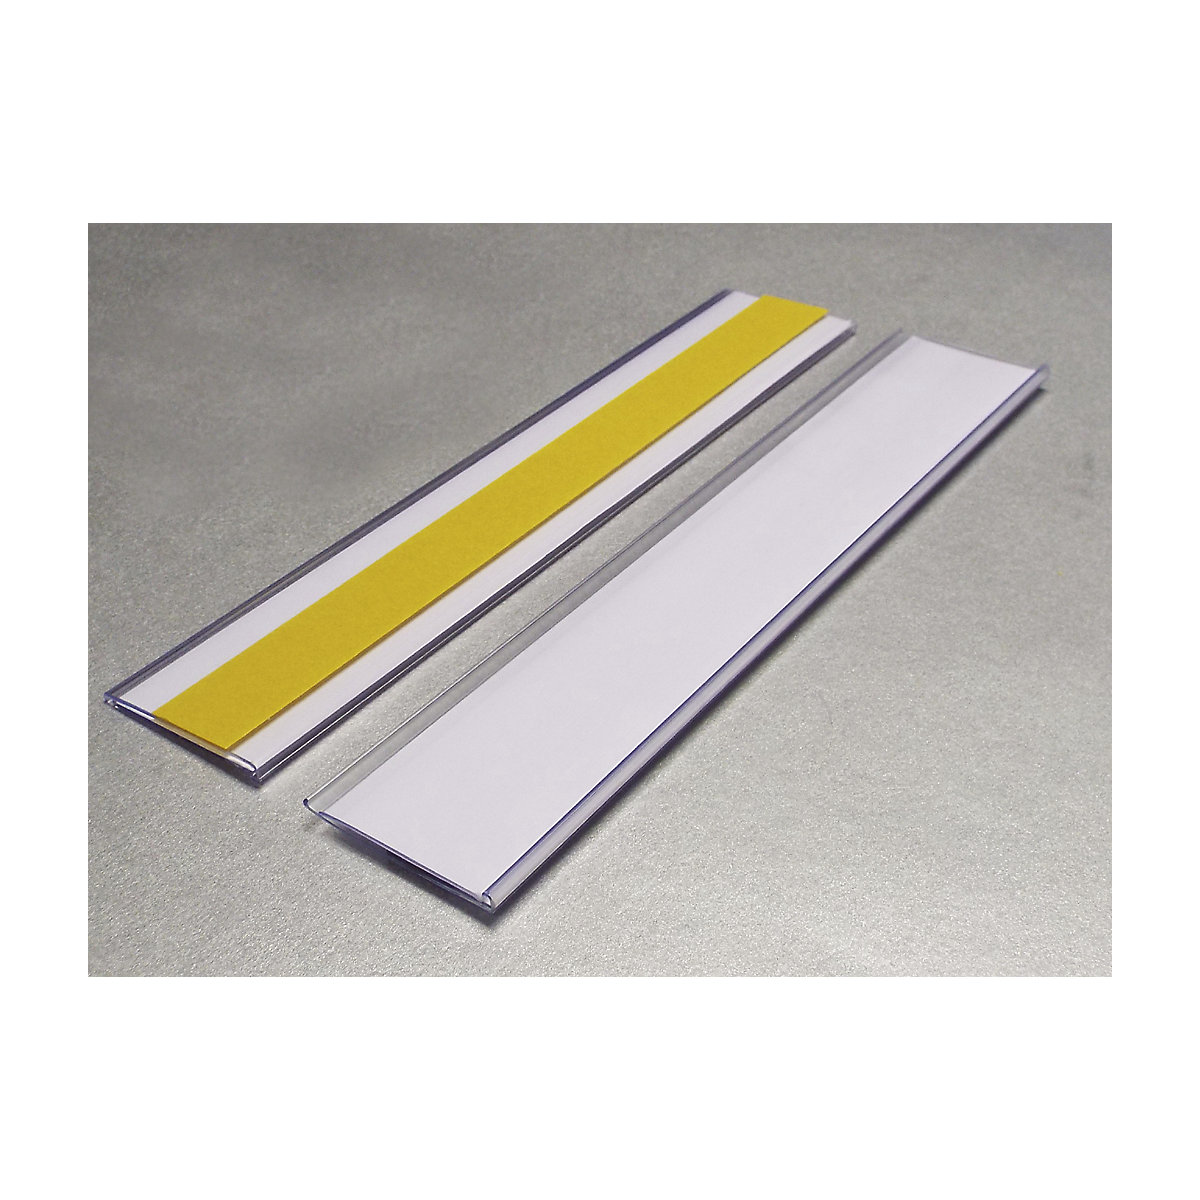 Ticket holders, self-adhesive, HxW 38 x 200 mm, pack of 50-5